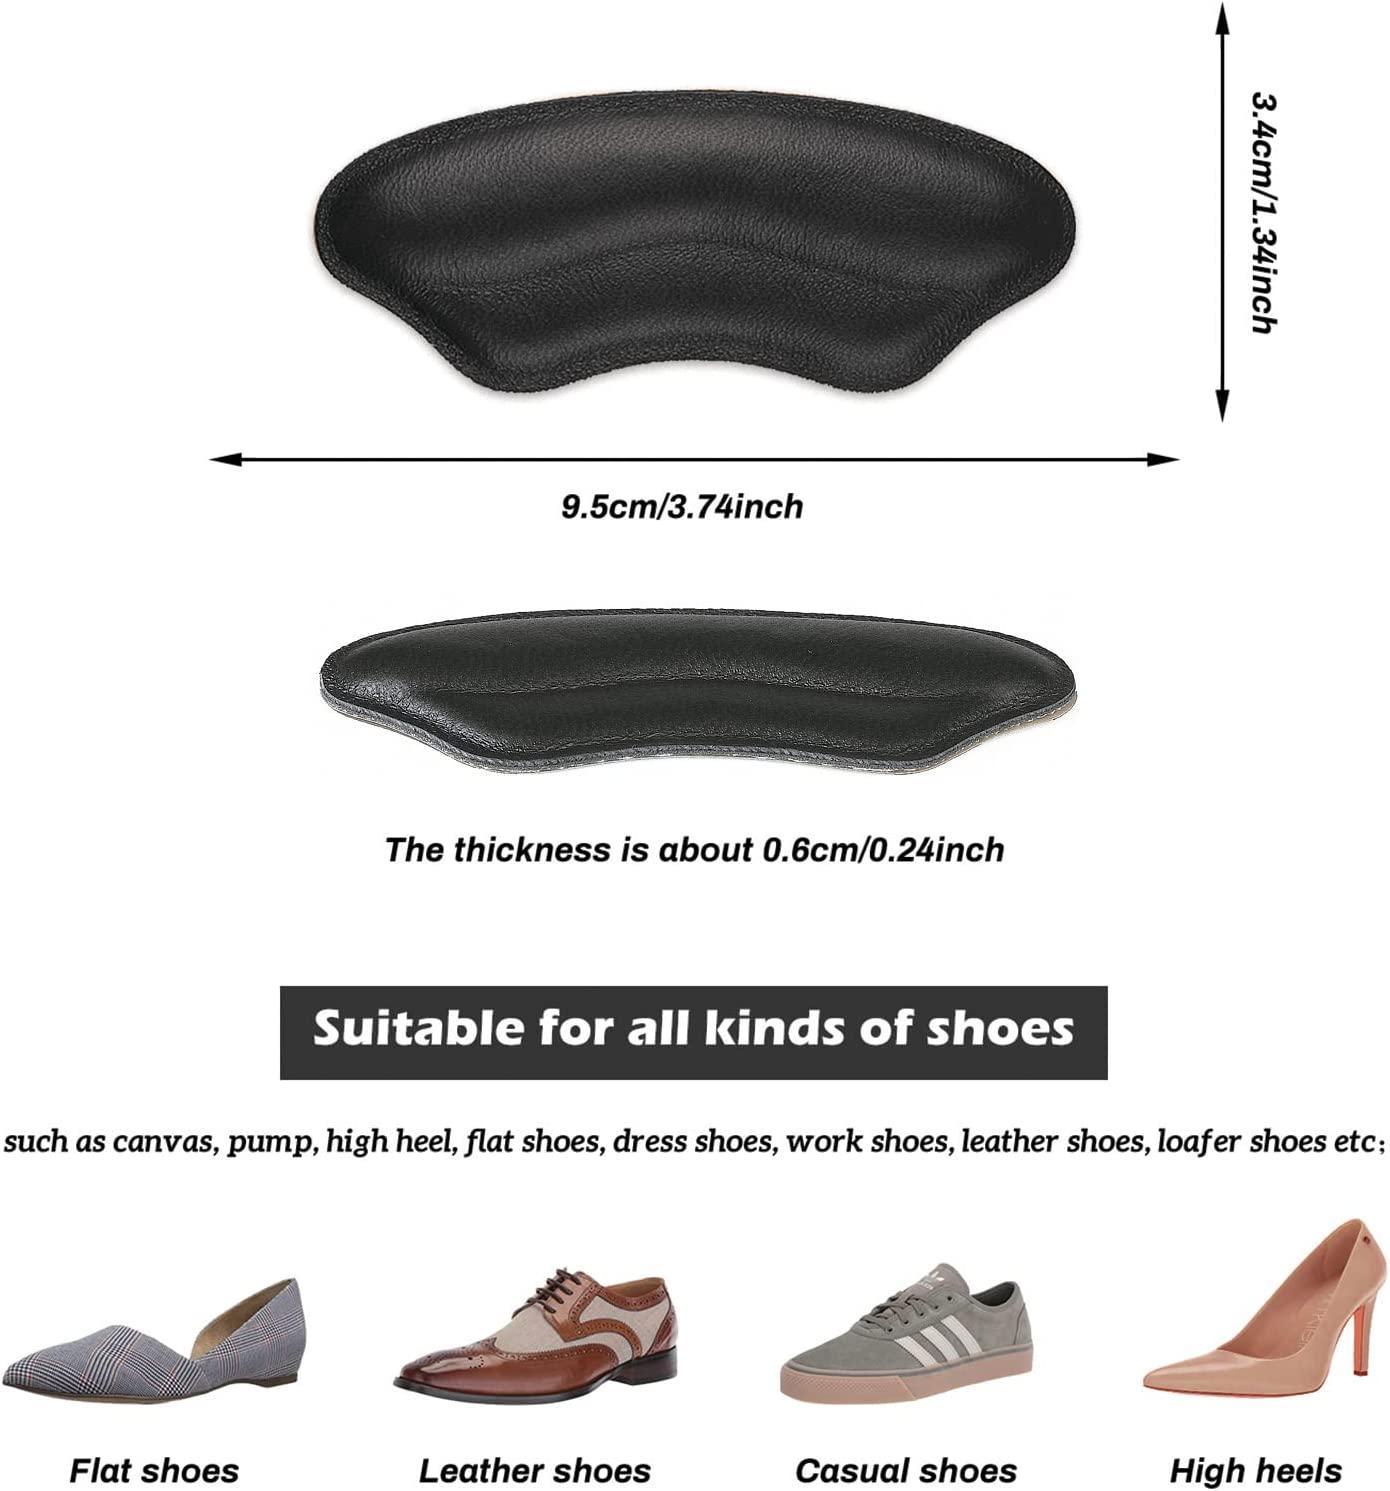 Amazon.com: Premium Heel Pads for Shoes Too Big, Self-Adhesive Heel Inserts  for Women&Men, Heel Grips to Improve Shoe Fit and Comfort, Heel Protectors  to Prevent Pain Blisters Calluses (2 Pairs) : Health